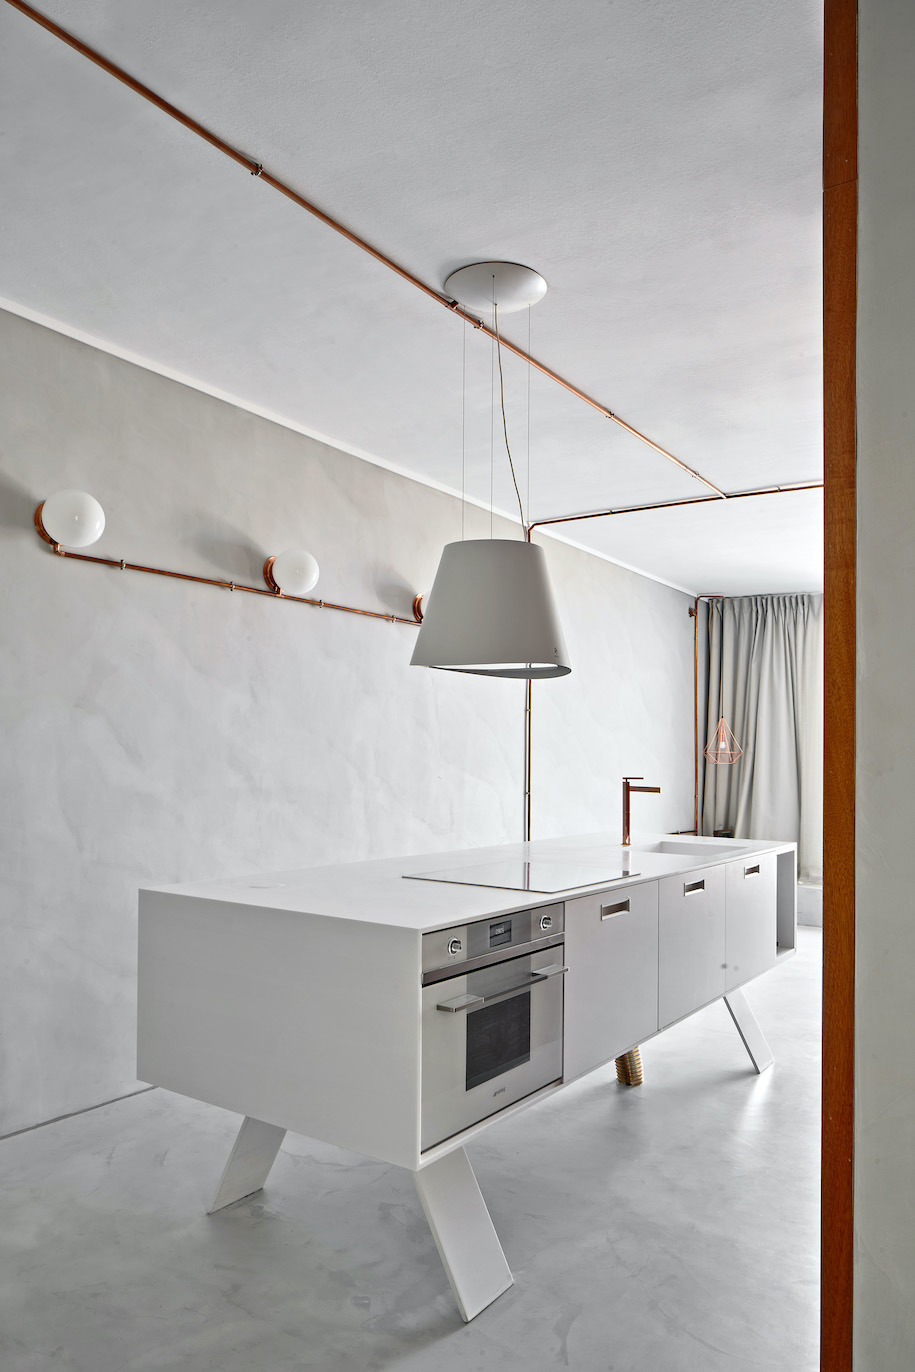 Archisearch Cometa architects' Marina apartment is an architectural journey where one needs just the essential.